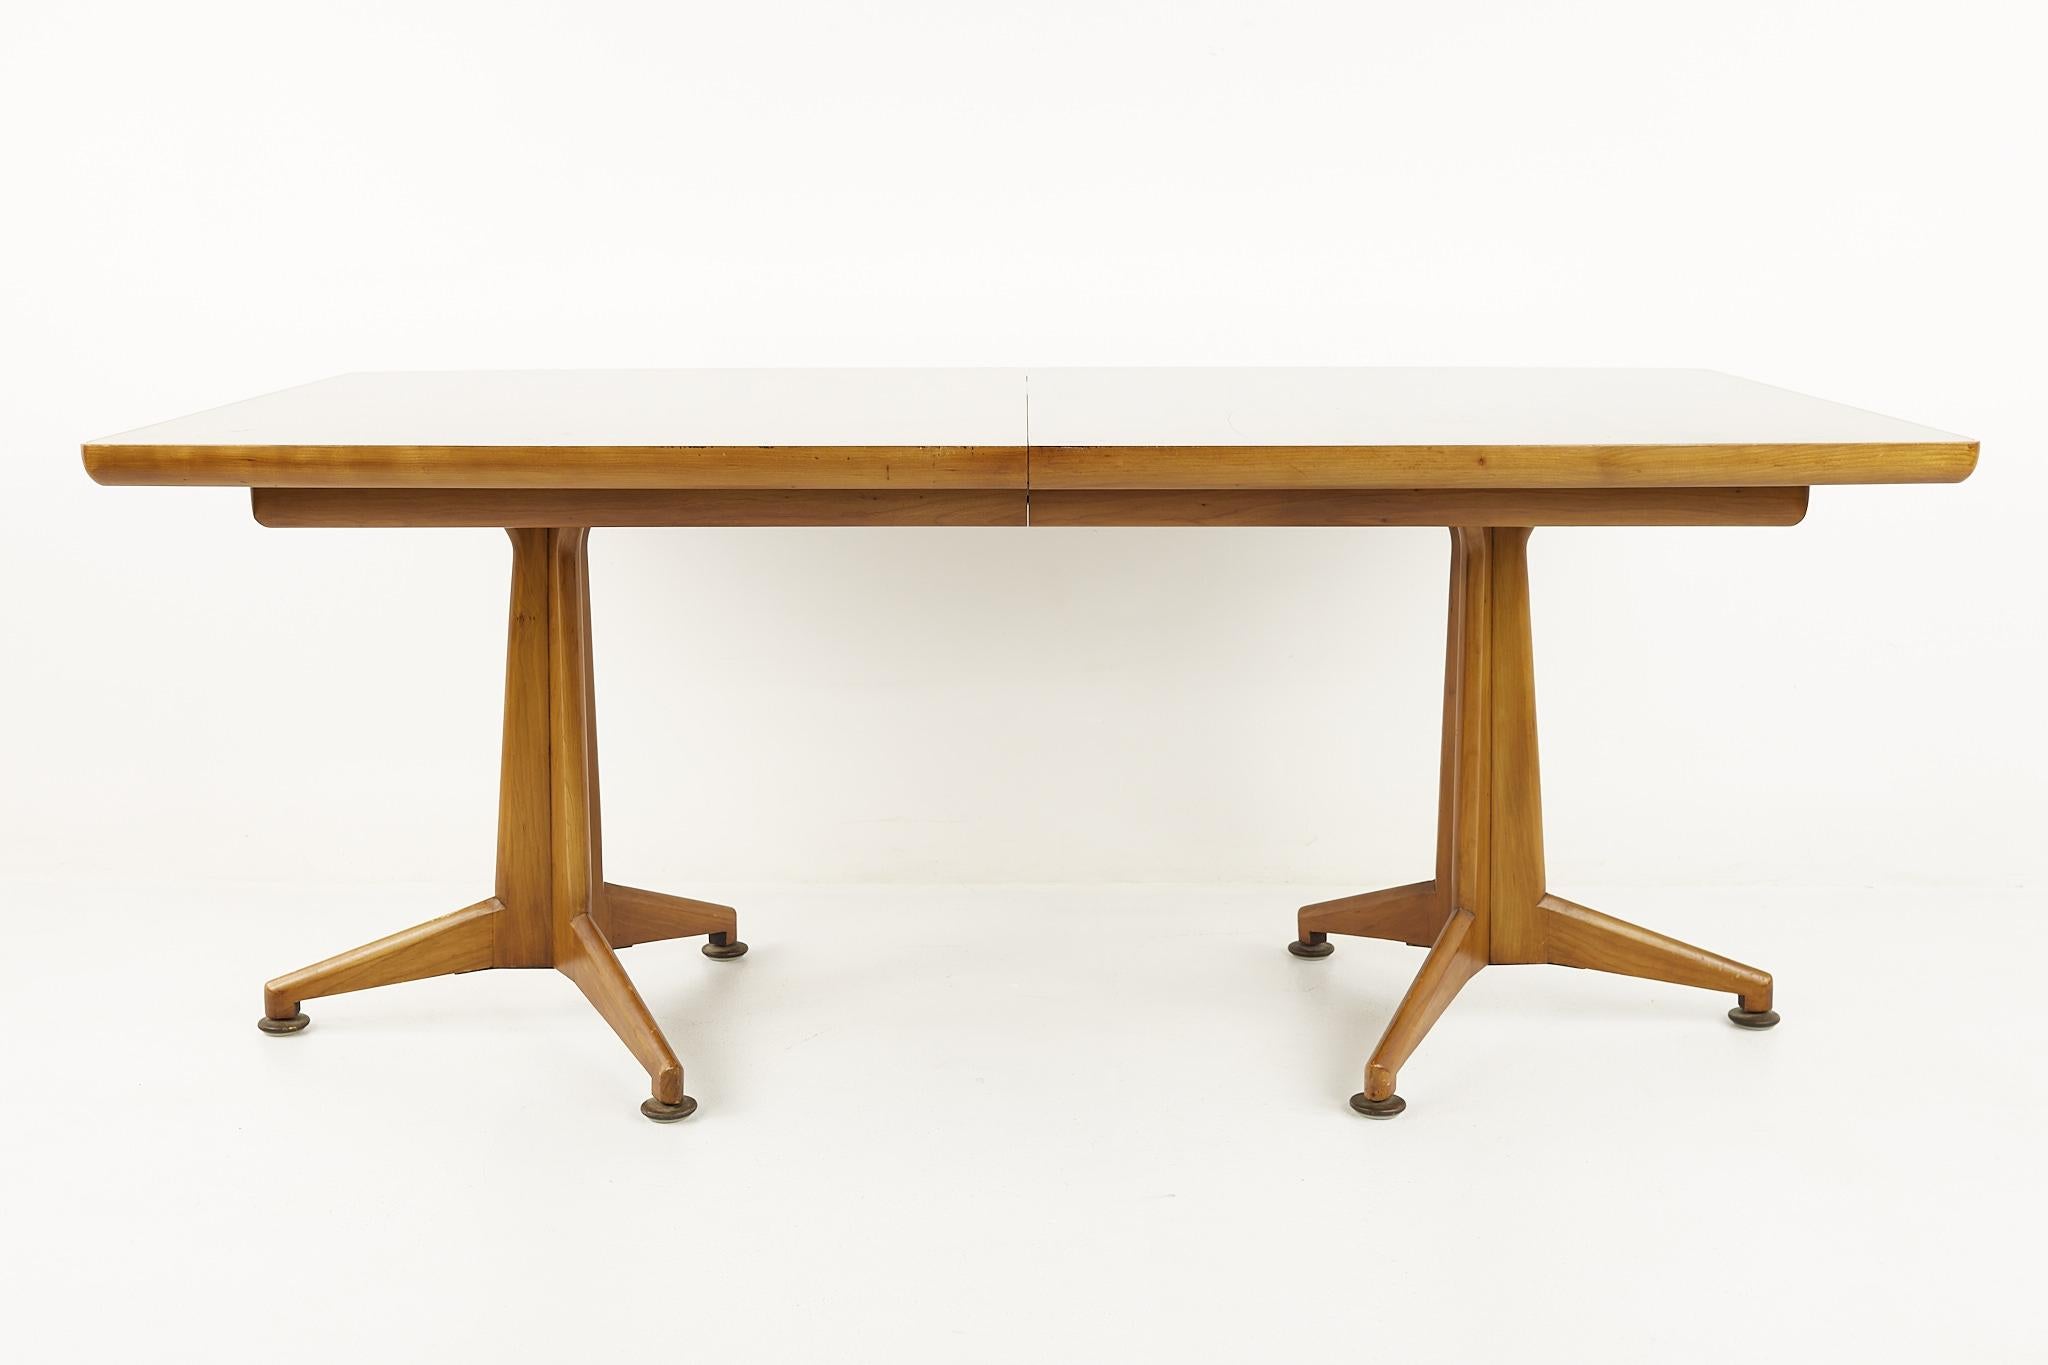 Widdicomb mid century dining table

This table measures: 72 wide x 44 deep x 29 inches high and a chair clearance of 24.75 inches; each leaf is 18 inches wide, making a maximum table width of 126 inches when all three leaves are used.

All